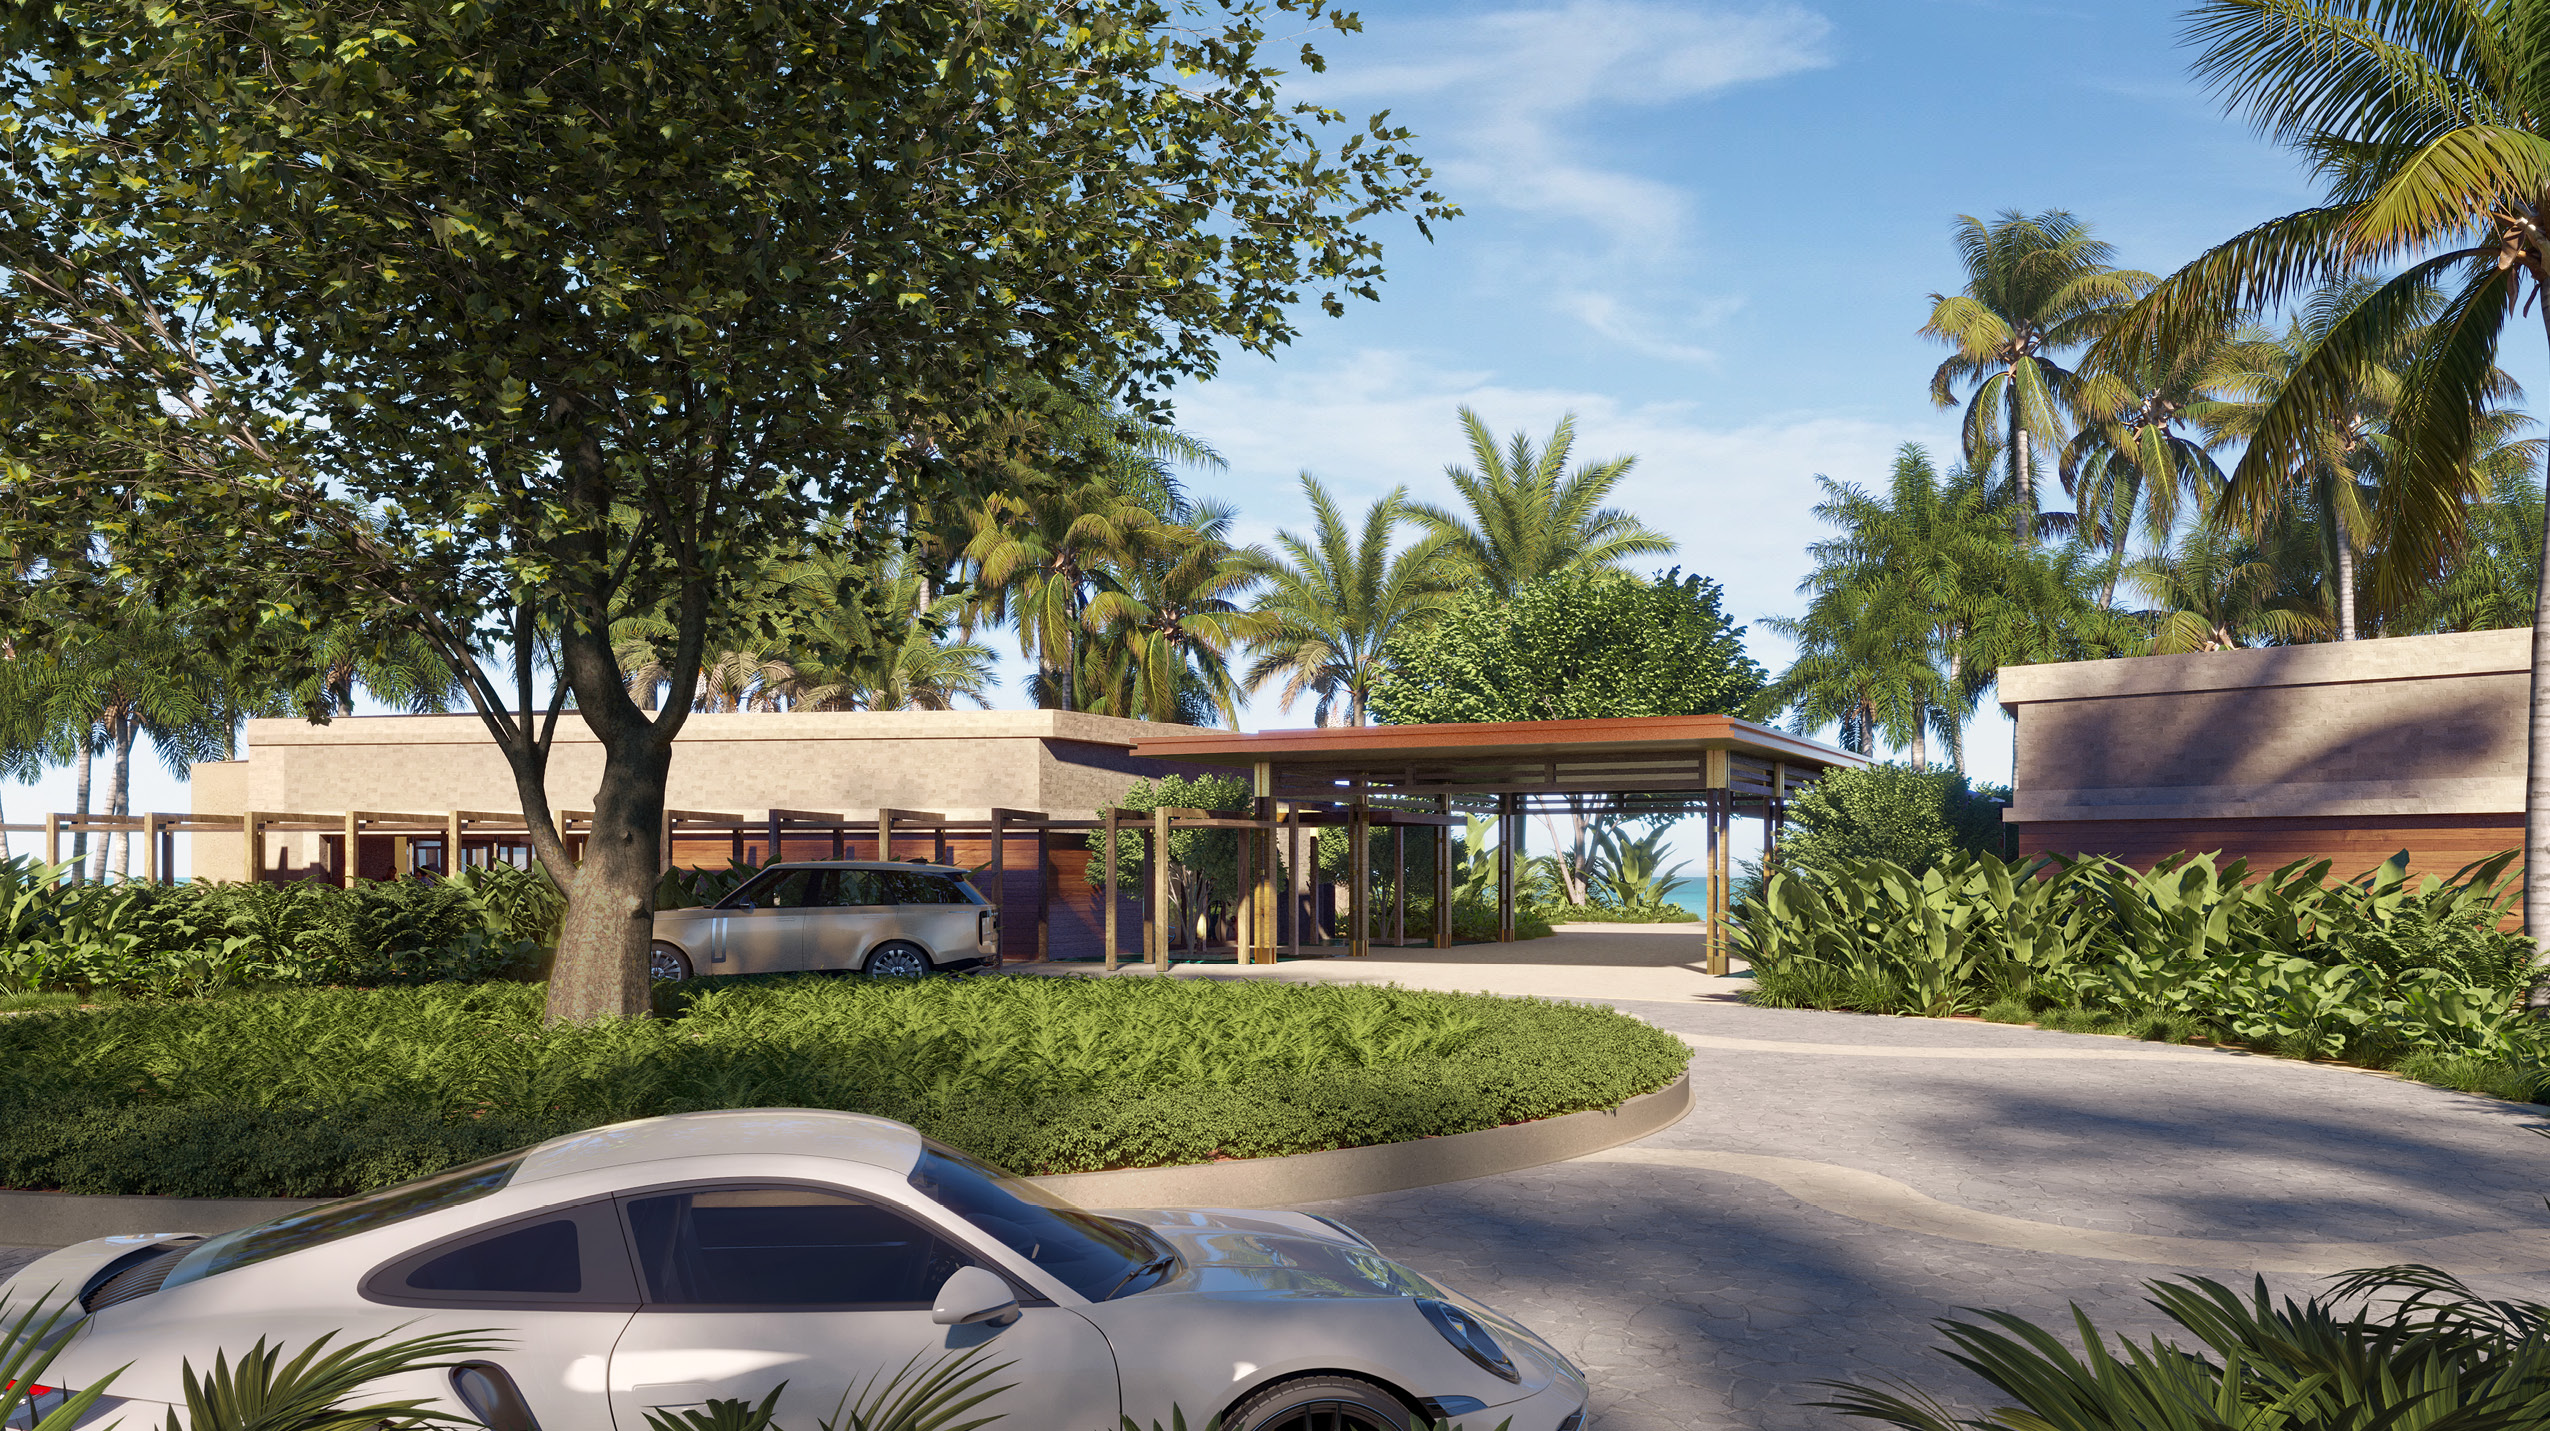 An inviting entrance to a luxury facility at Grand Reserve with lush landscaping and a modern, welcoming design.